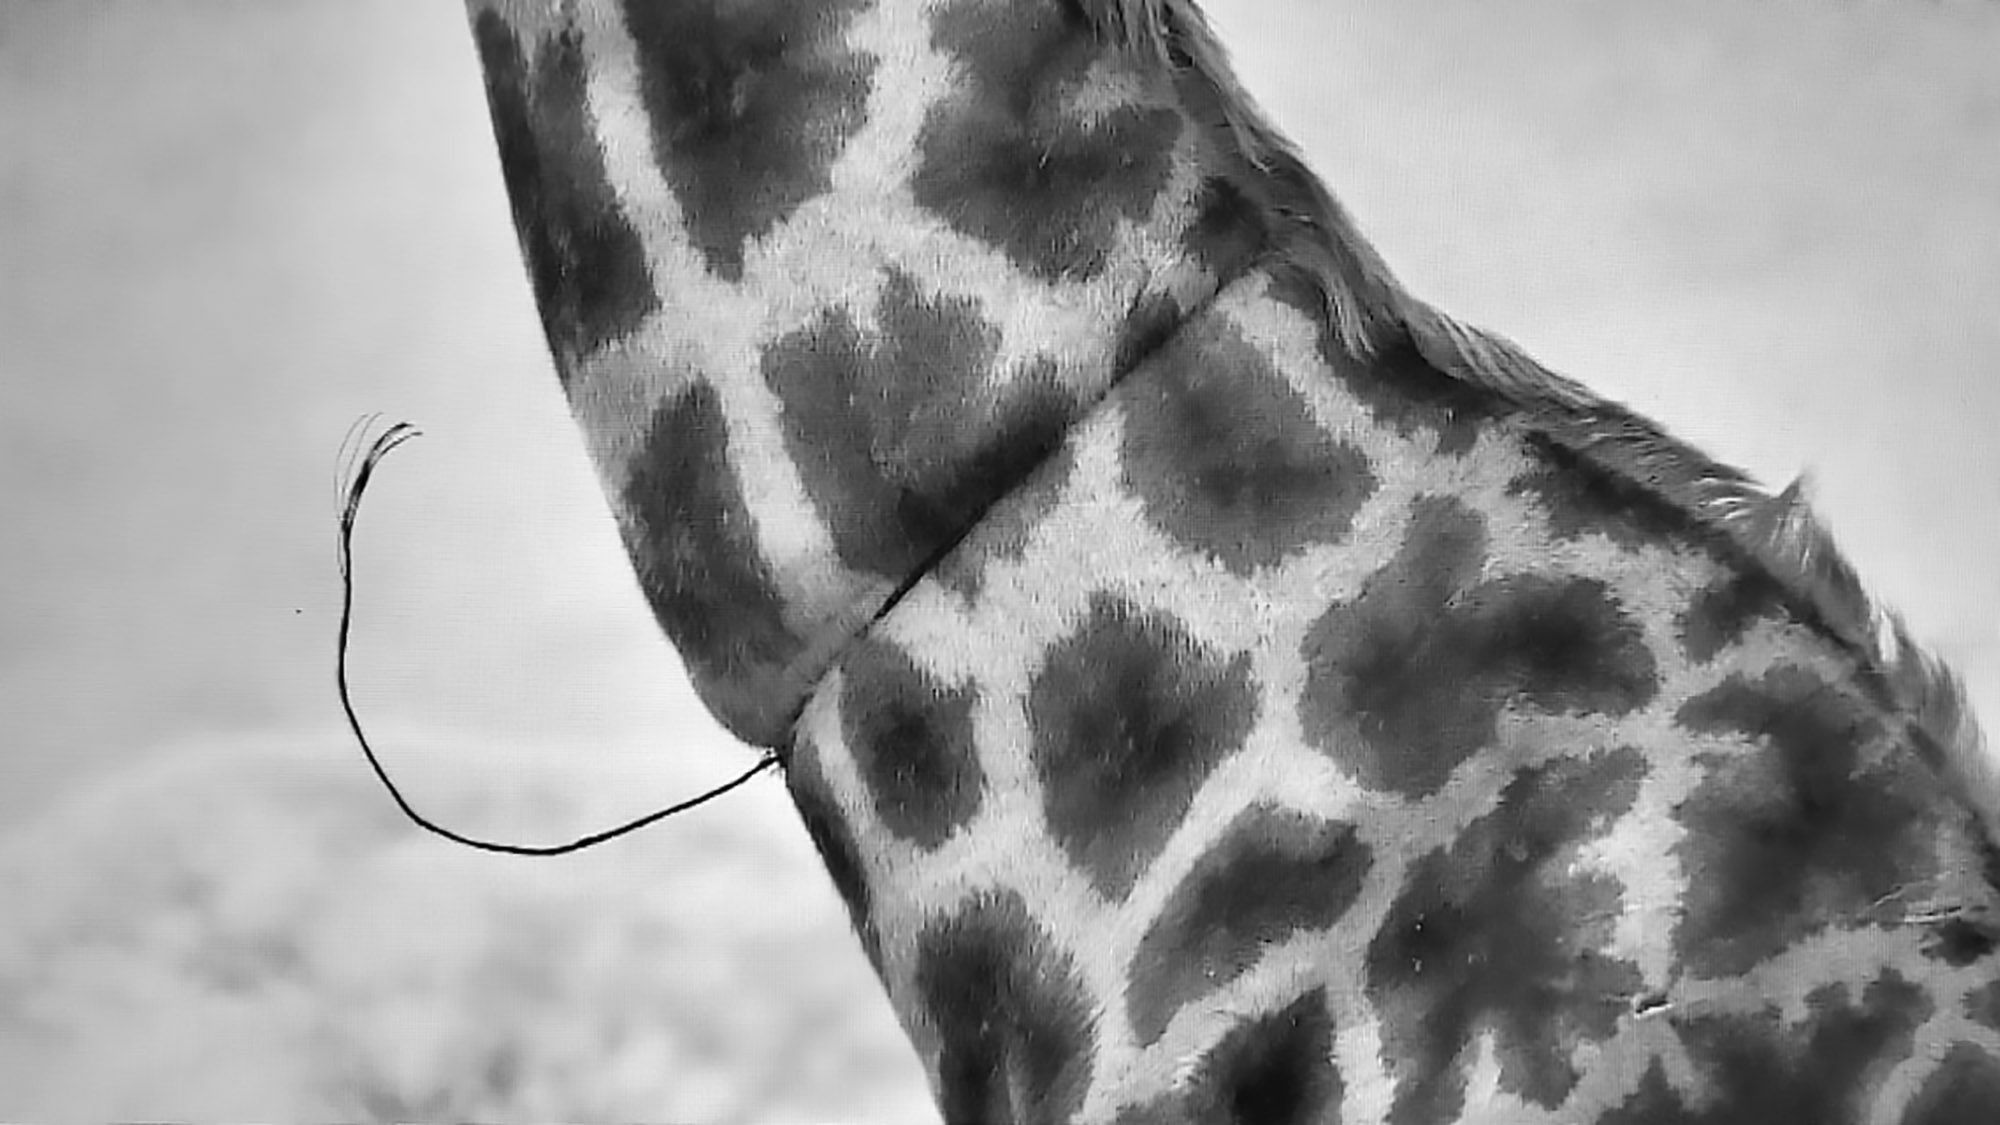 Read more about the article Crying Kenyan Giraffe In Snare Stops Film Crew For Help